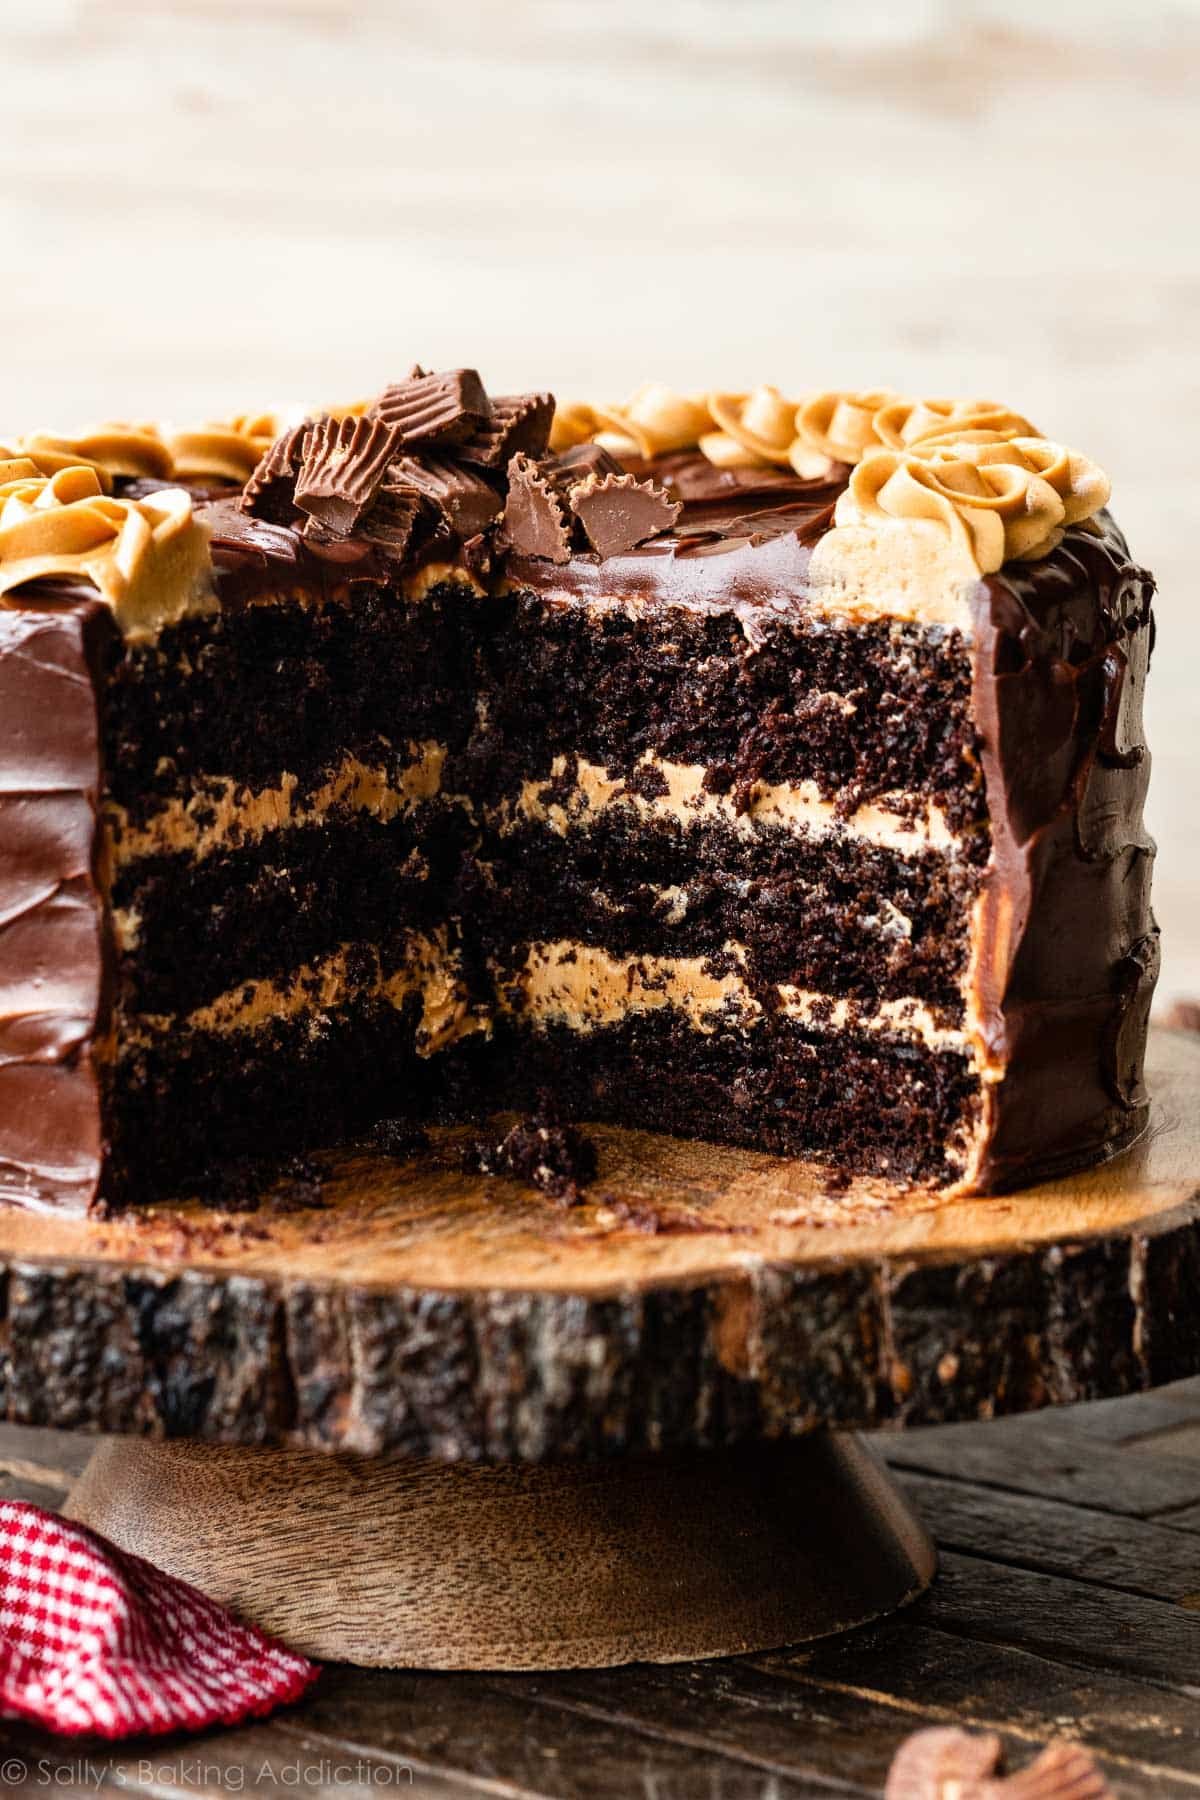 https://www.pastramiandthings.com/wp-content/uploads/2024/01/chocolate-and-peanut-butter-cake.jpg